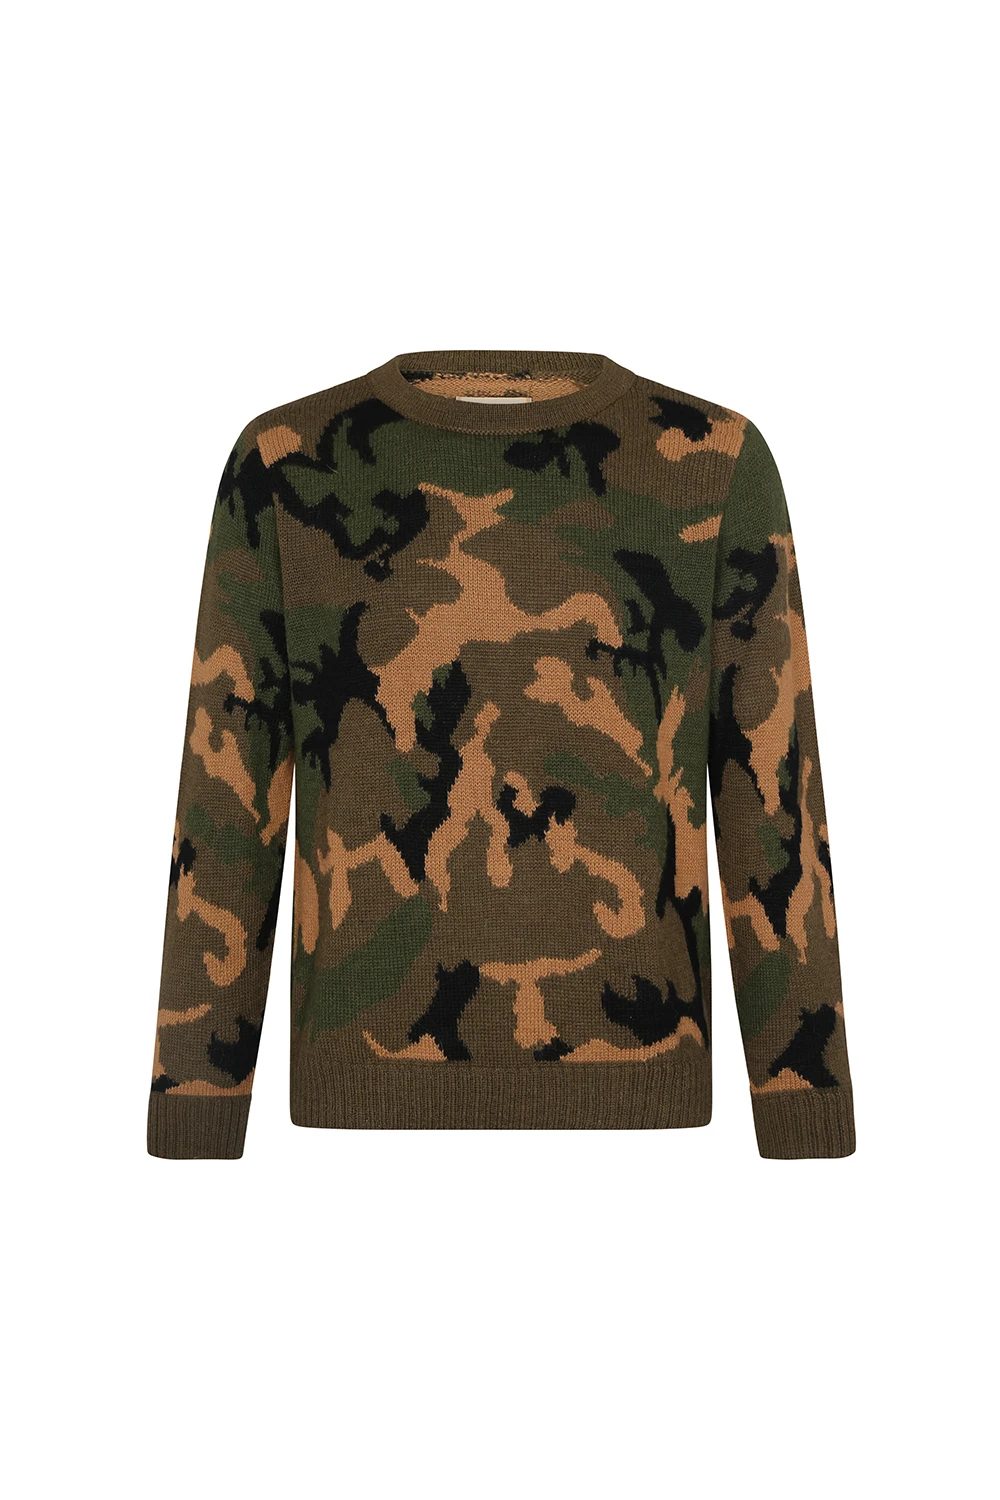 CamouflageSweater - Men's Clothing - Norgate. Luxury Alpaca Cothing